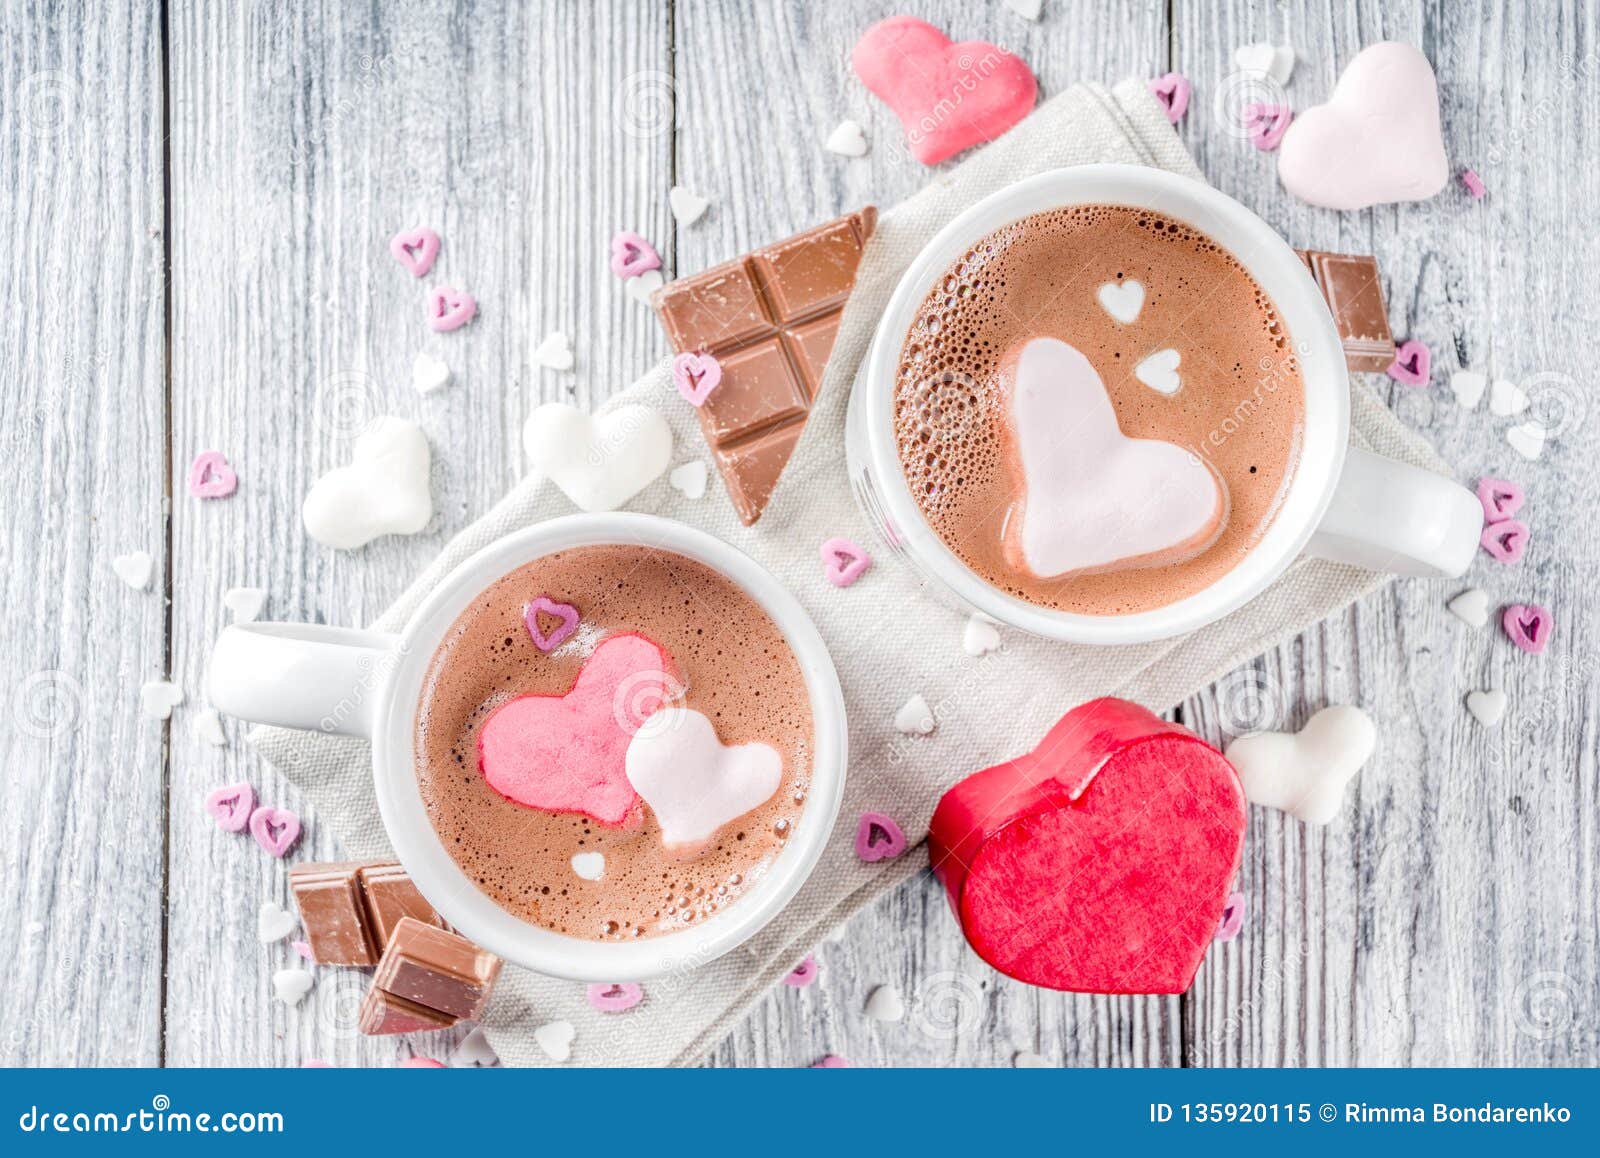 https://thumbs.dreamstime.com/z/valentines-day-hot-chocolate-marshmallow-hearts-treat-ideas-two-cups-drink-red-pink-white-color-pieces-sugar-sprinkles-old-135920115.jpg